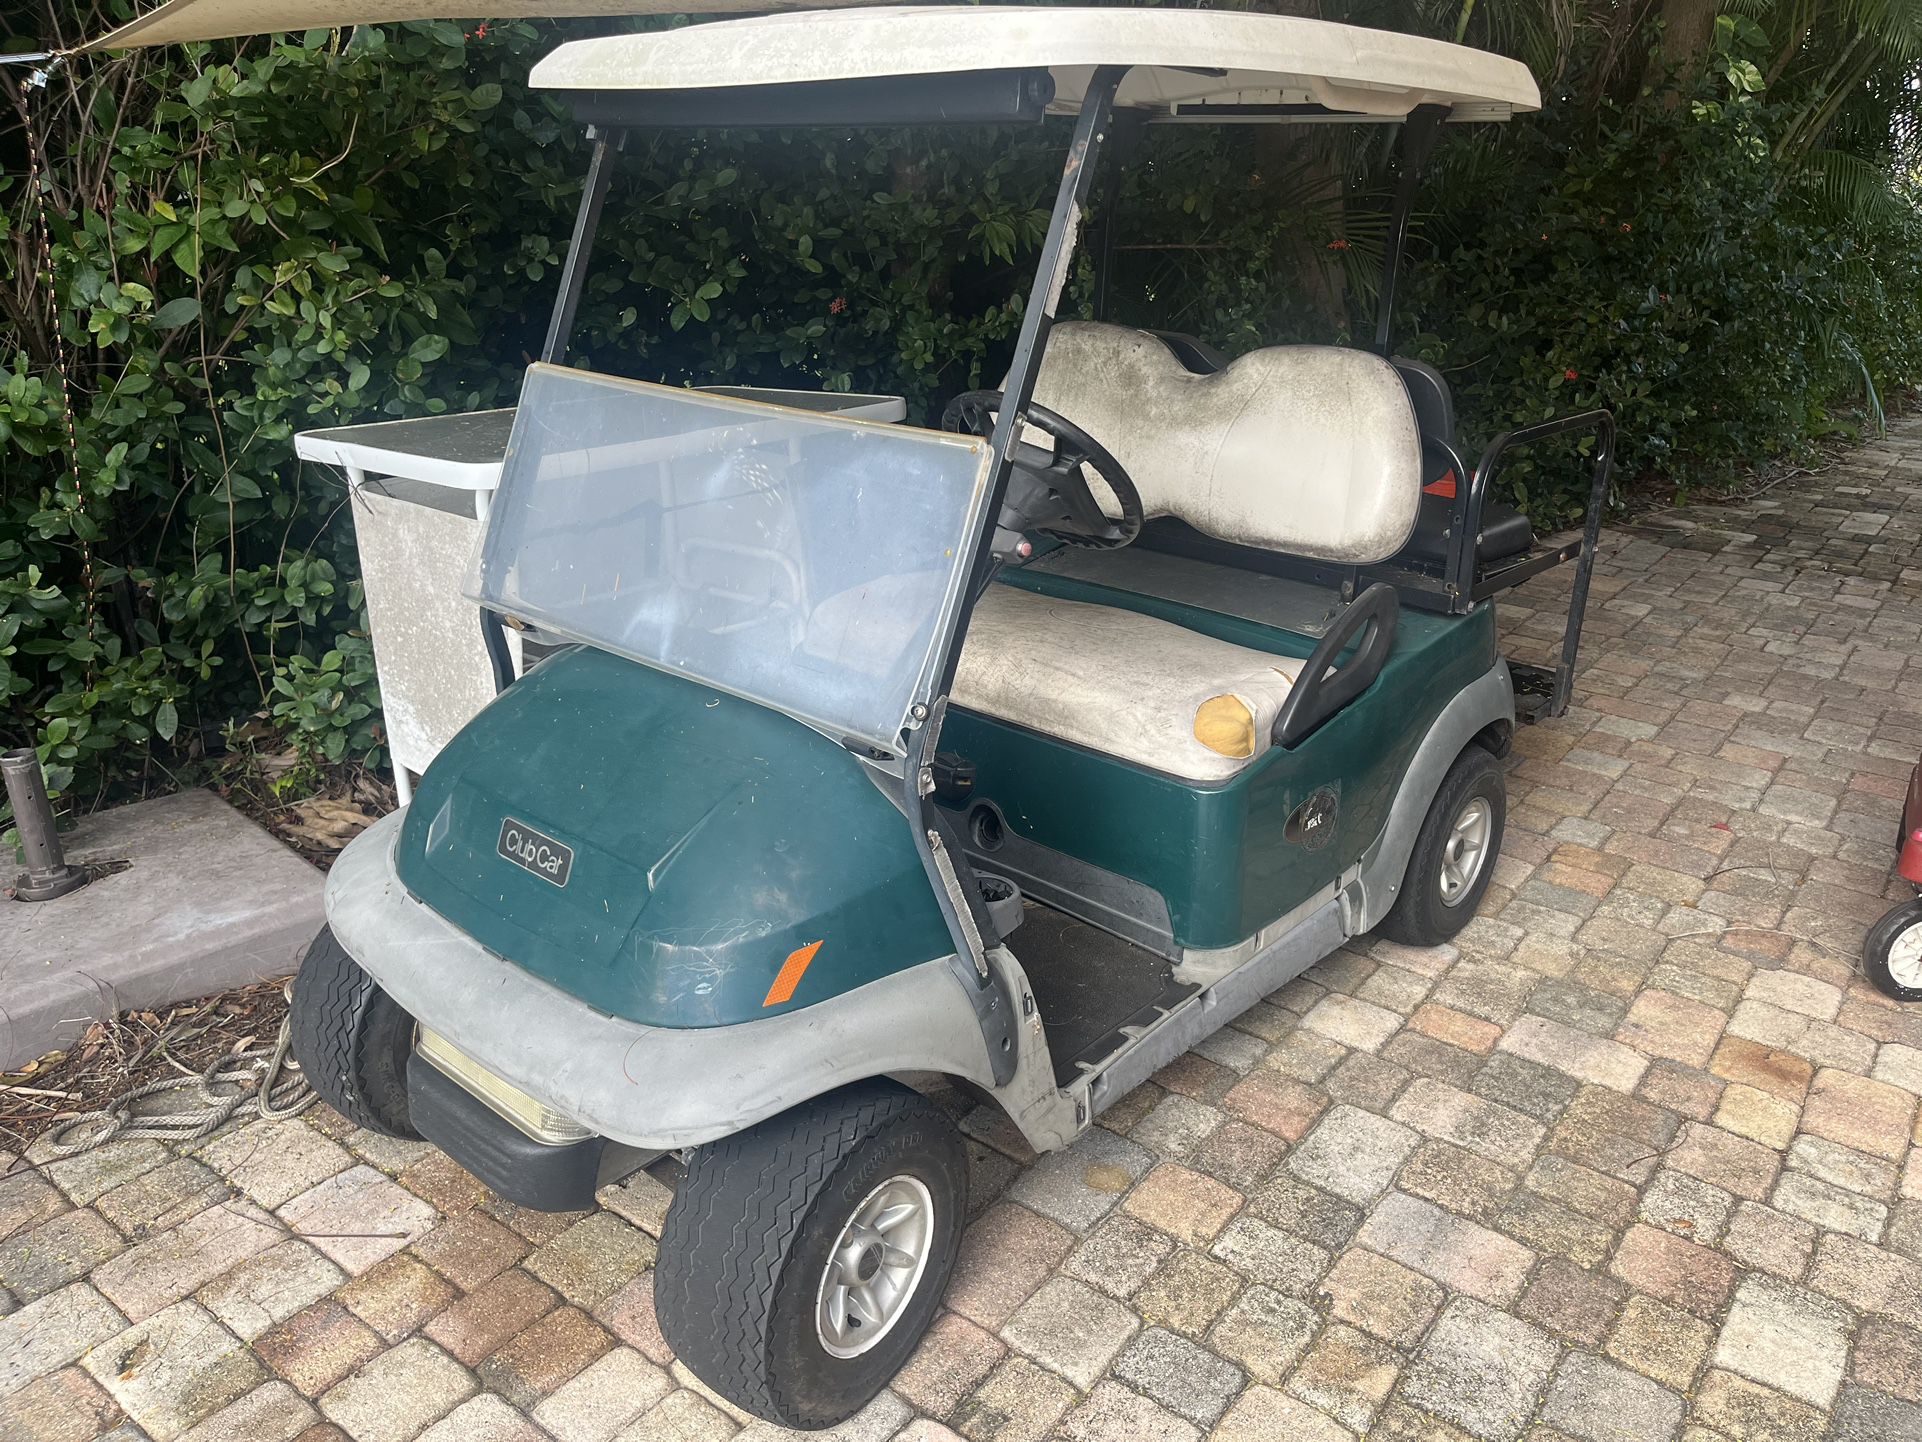 club car precedent with all new batteries, motor, electronics, needs cosmetic work only